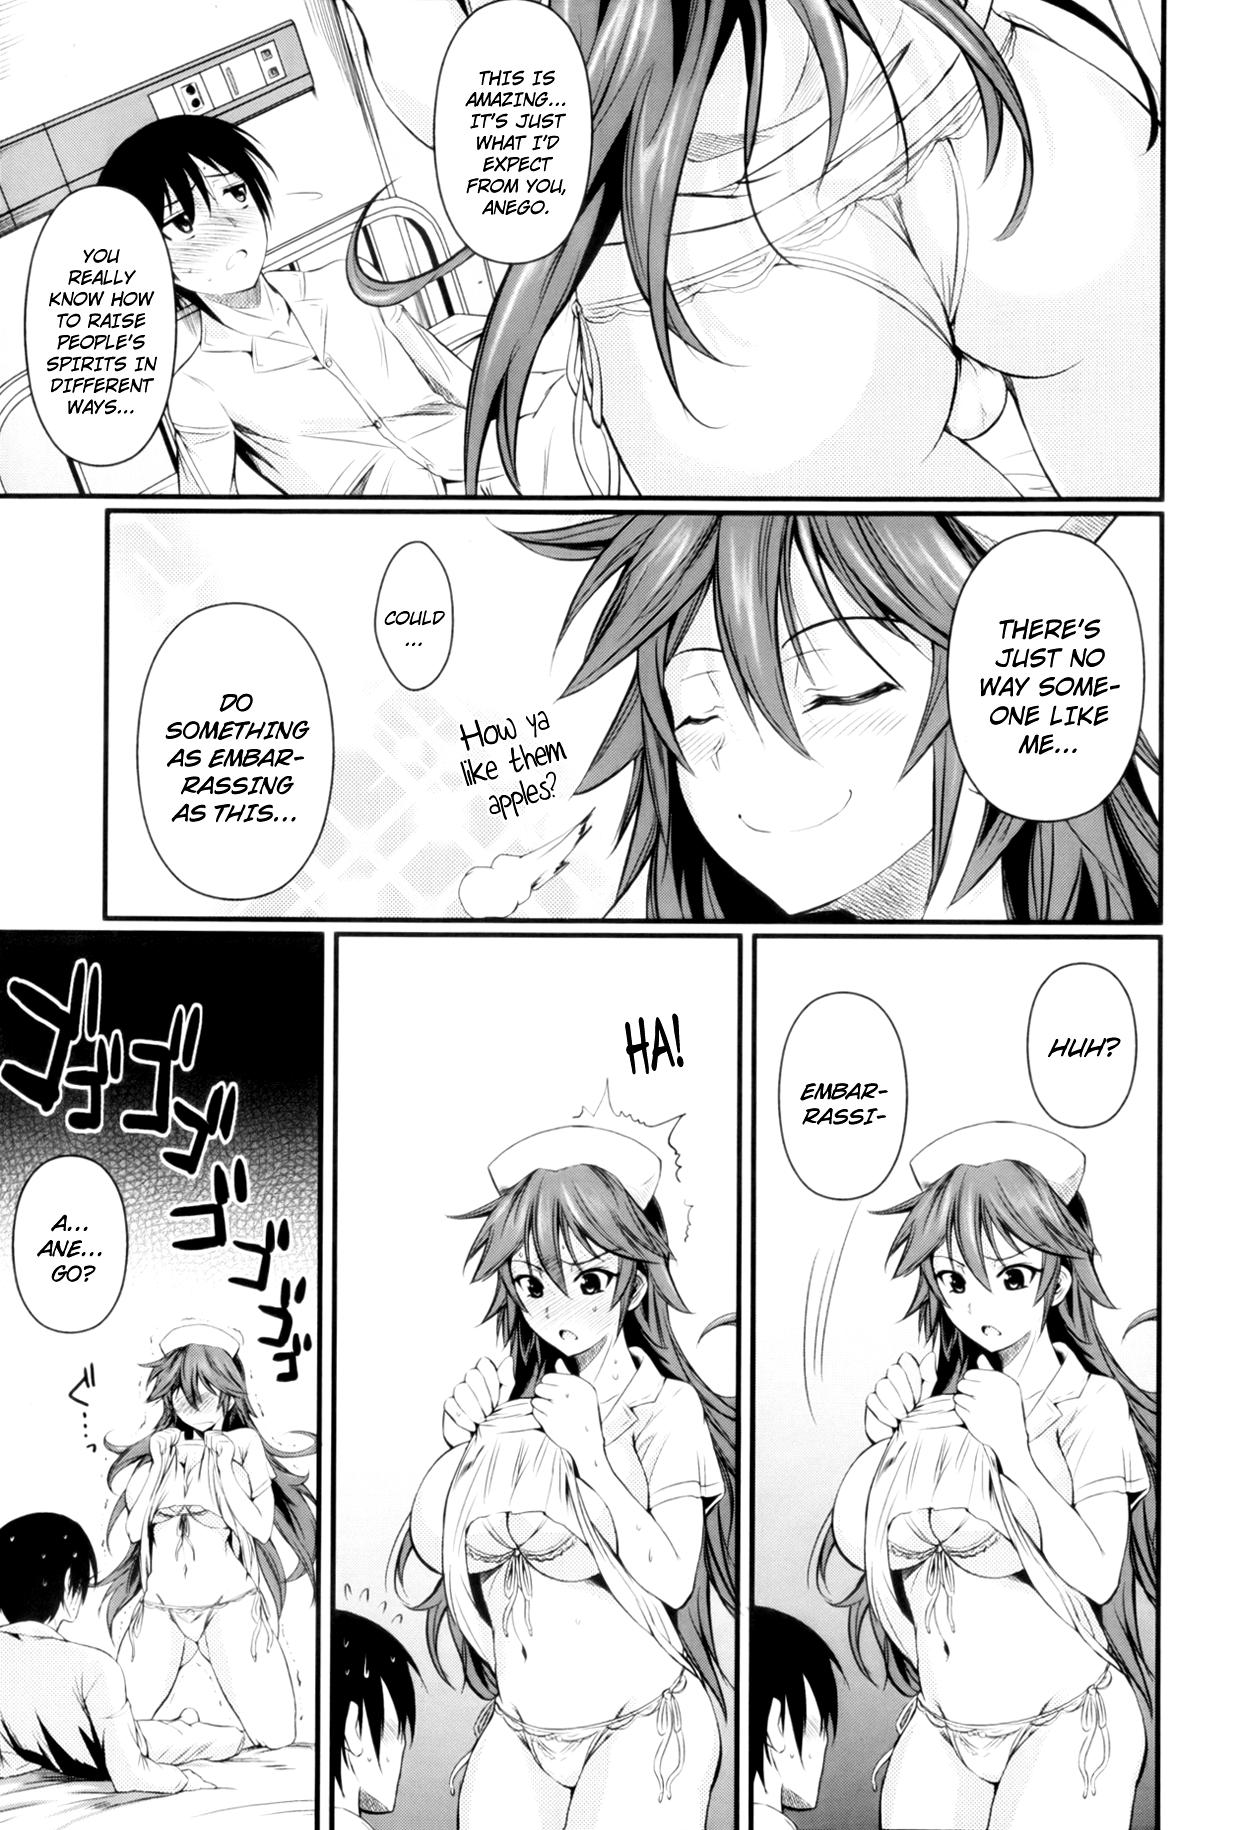 Stepson Tenshi na Anego | An Angelic Anego Shot - Page 5